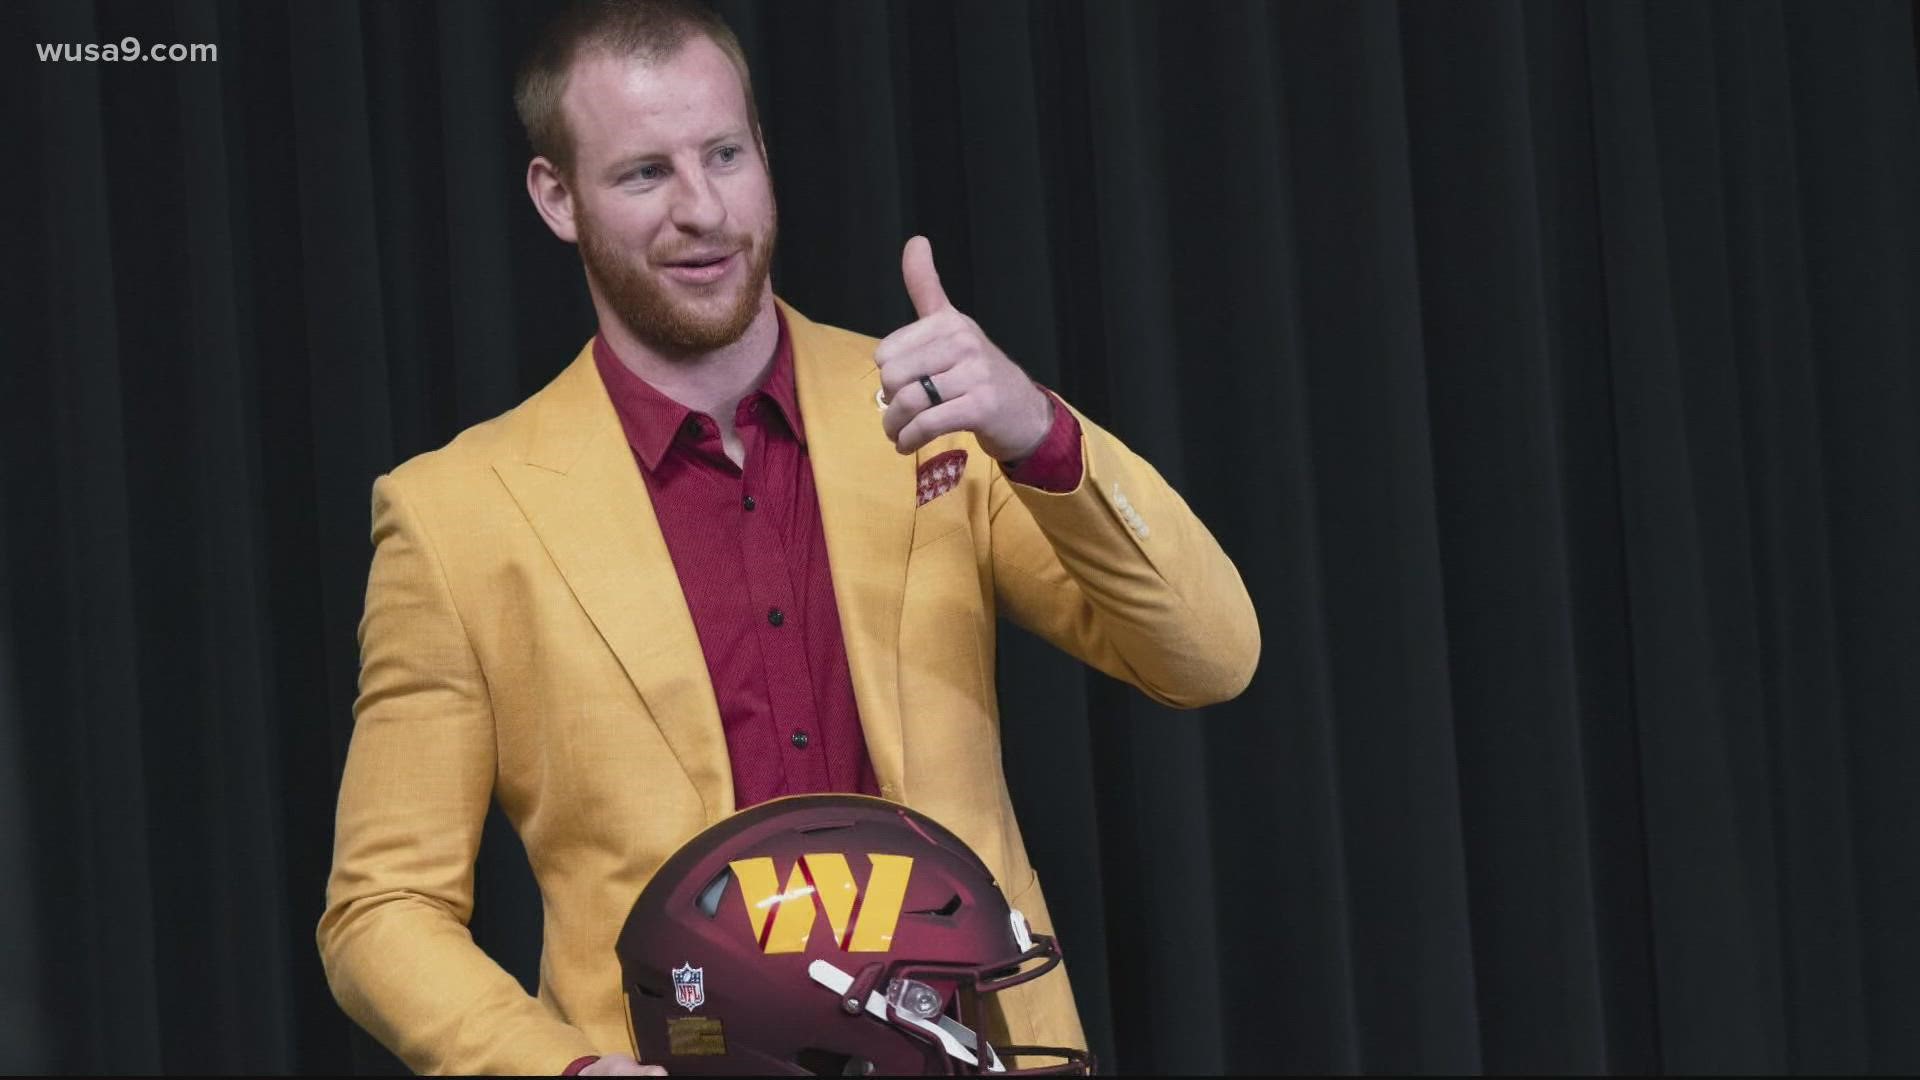 If Carson Wentz plays like the way he dresses, he's off to a strong start in DC.